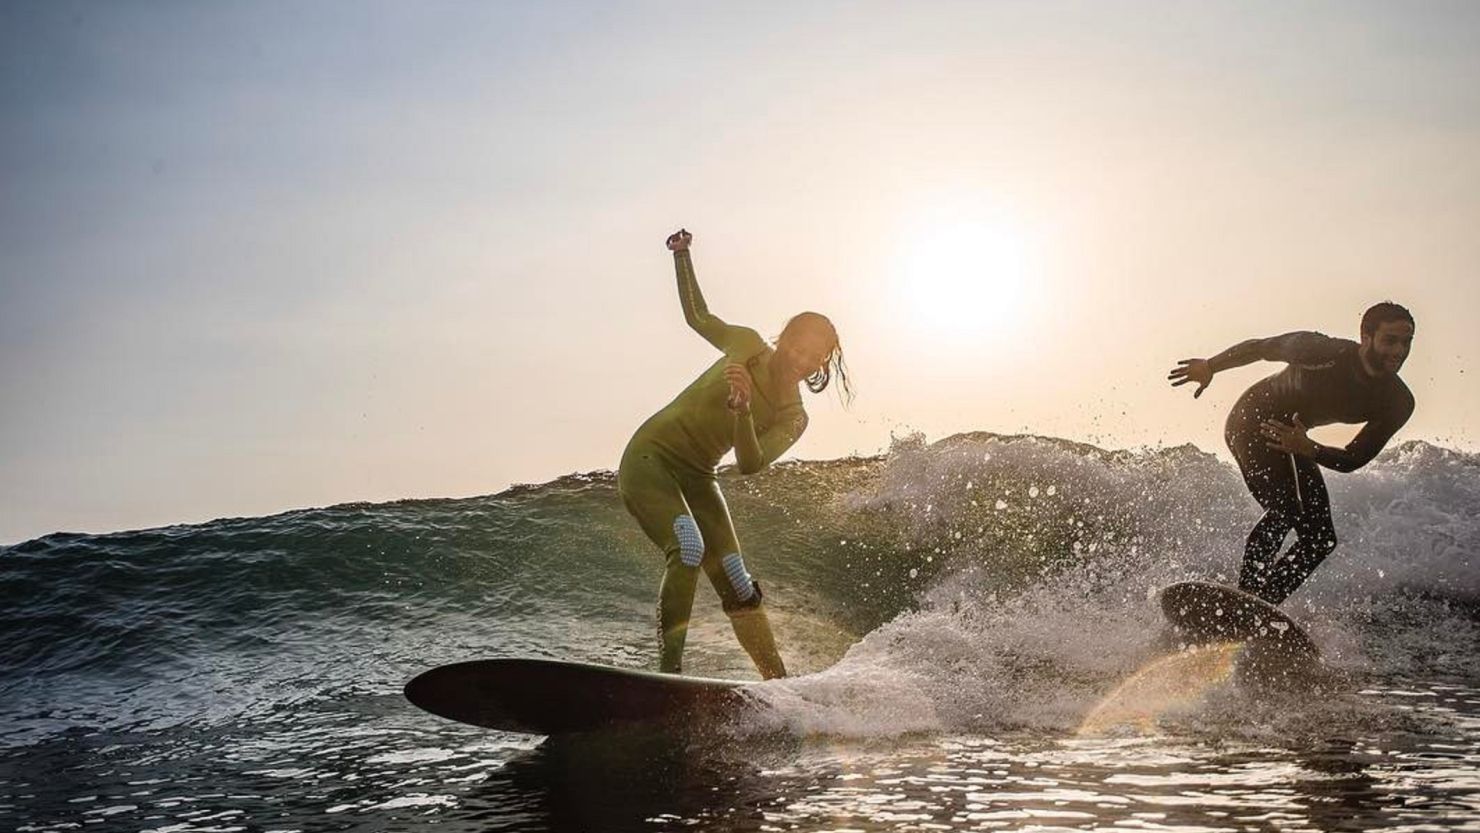 Surfing has become increasingly popular among Lebanese locals.